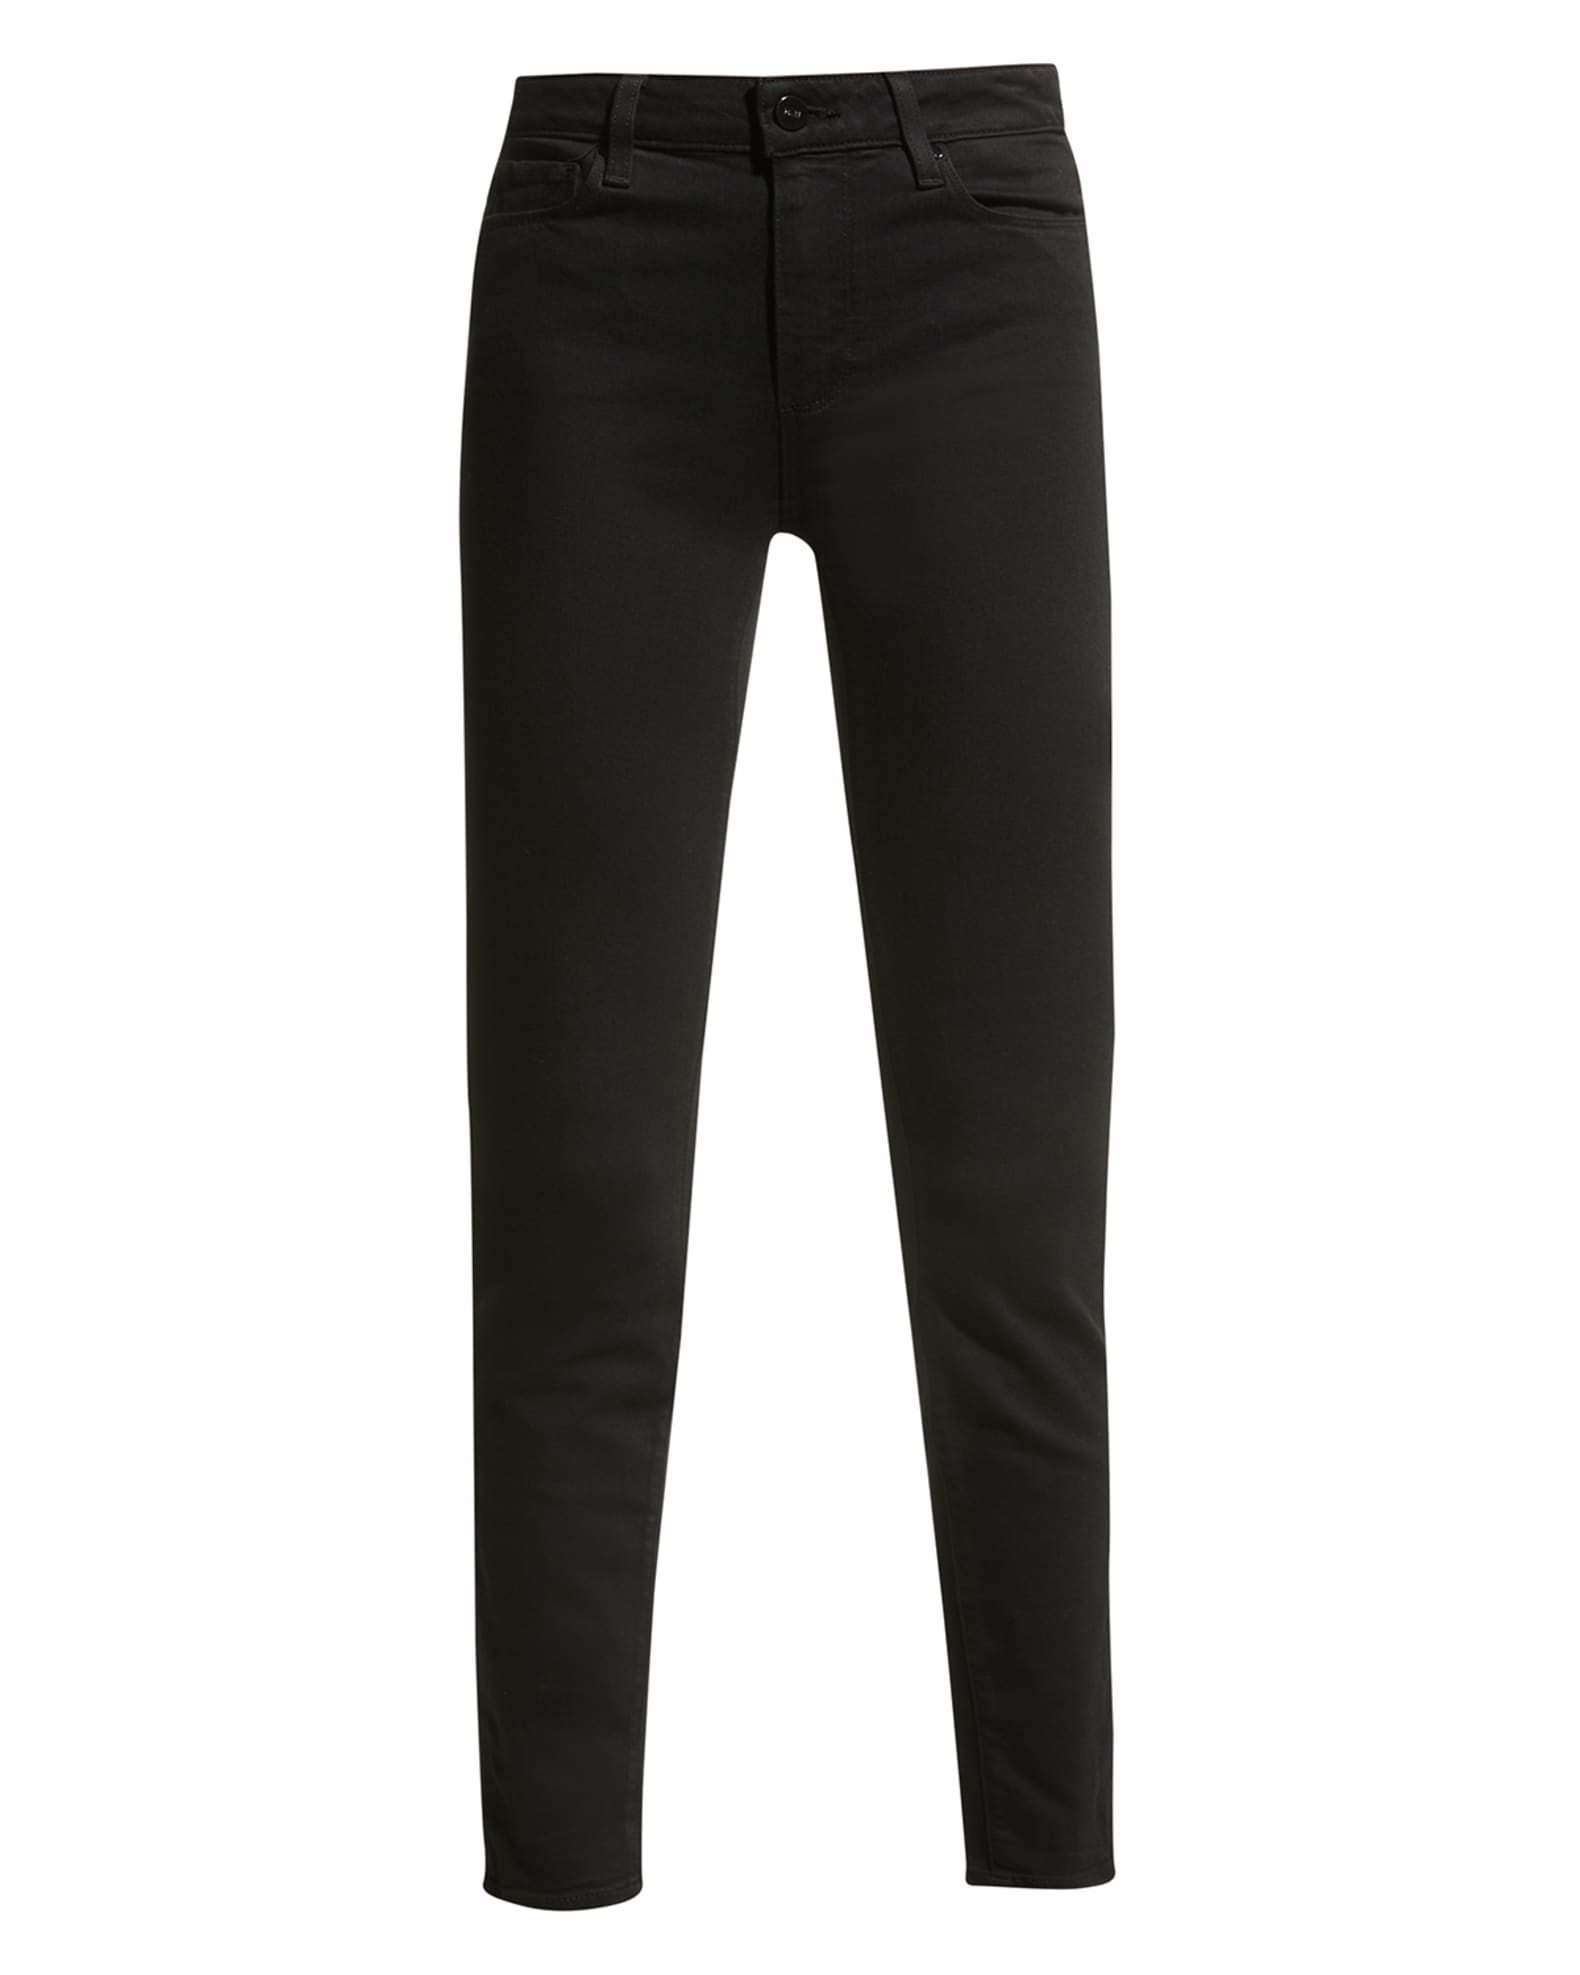 PAIGE Hoxton Ultra-Skinny Ankle Jeans, Black Shadow | Neiman Marcus